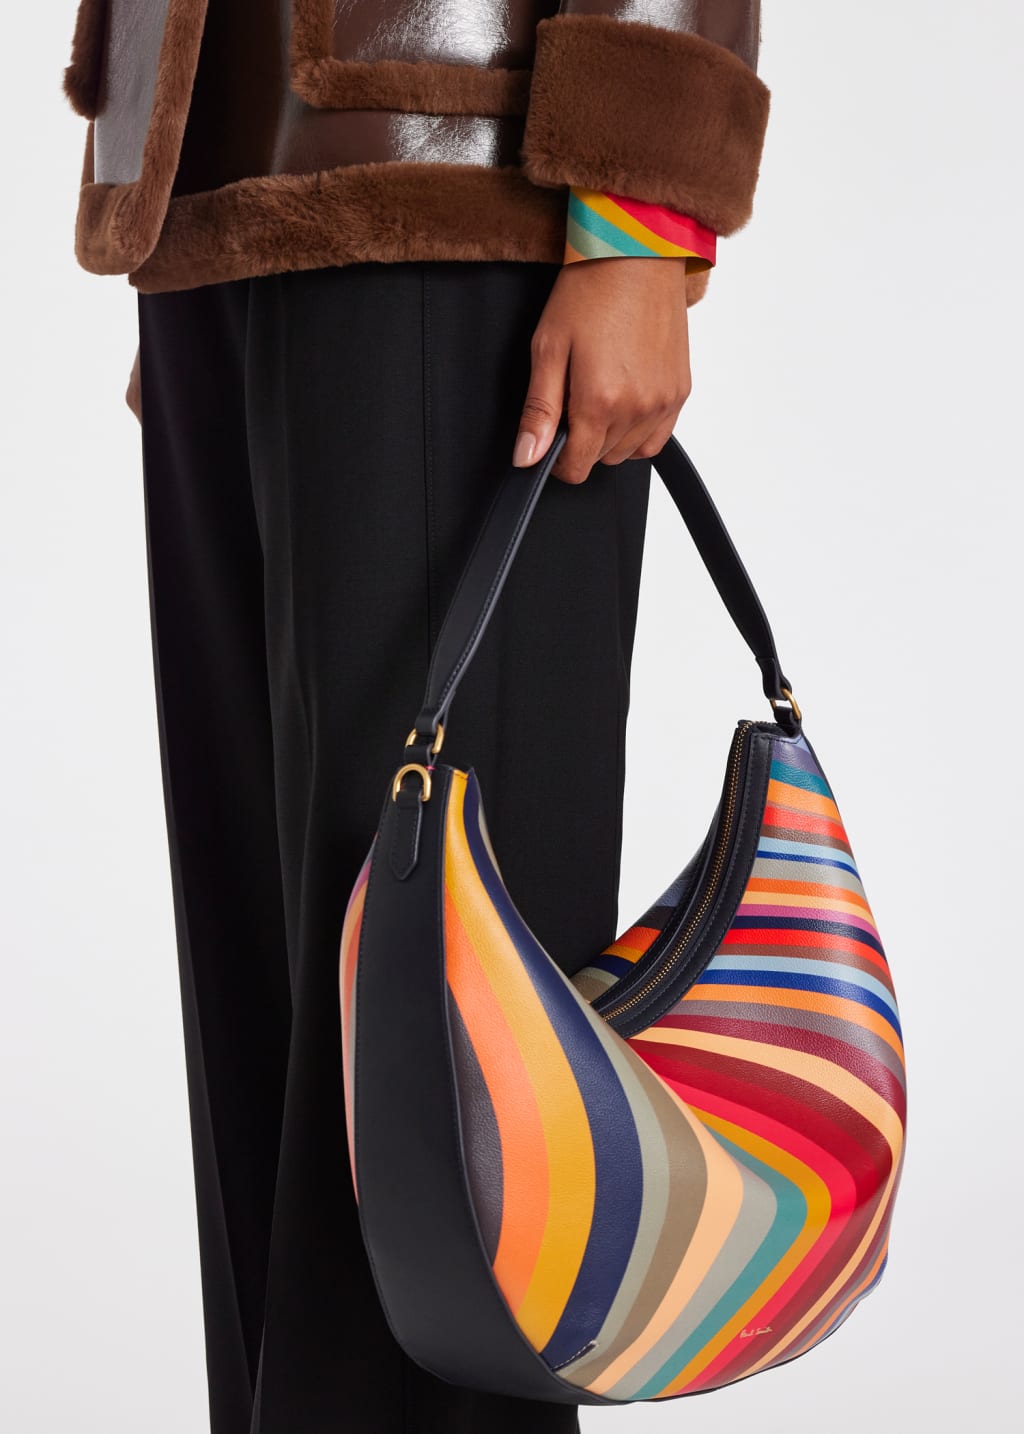 Product View - Women's 'Swirl' Leather Medium Round Hobo Bag by Paul Smith